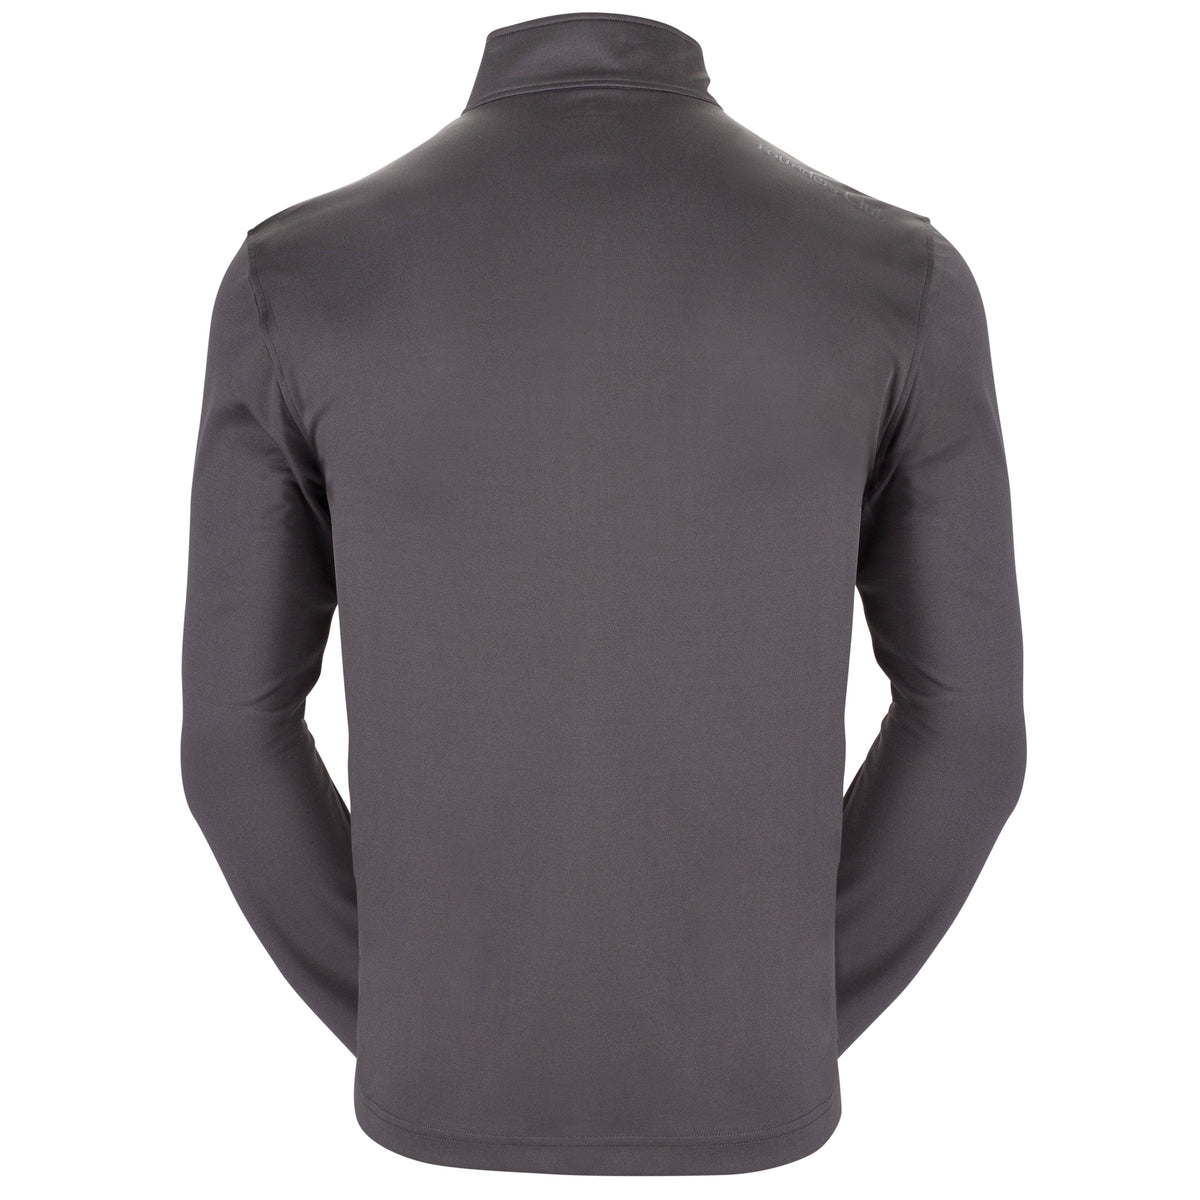 Founders Club Performance Men&#39;s Long Sleeve Lightweight Breathable Thermal Half Zip Baselayer Shirt Top Golf Hiking Skiing Gray